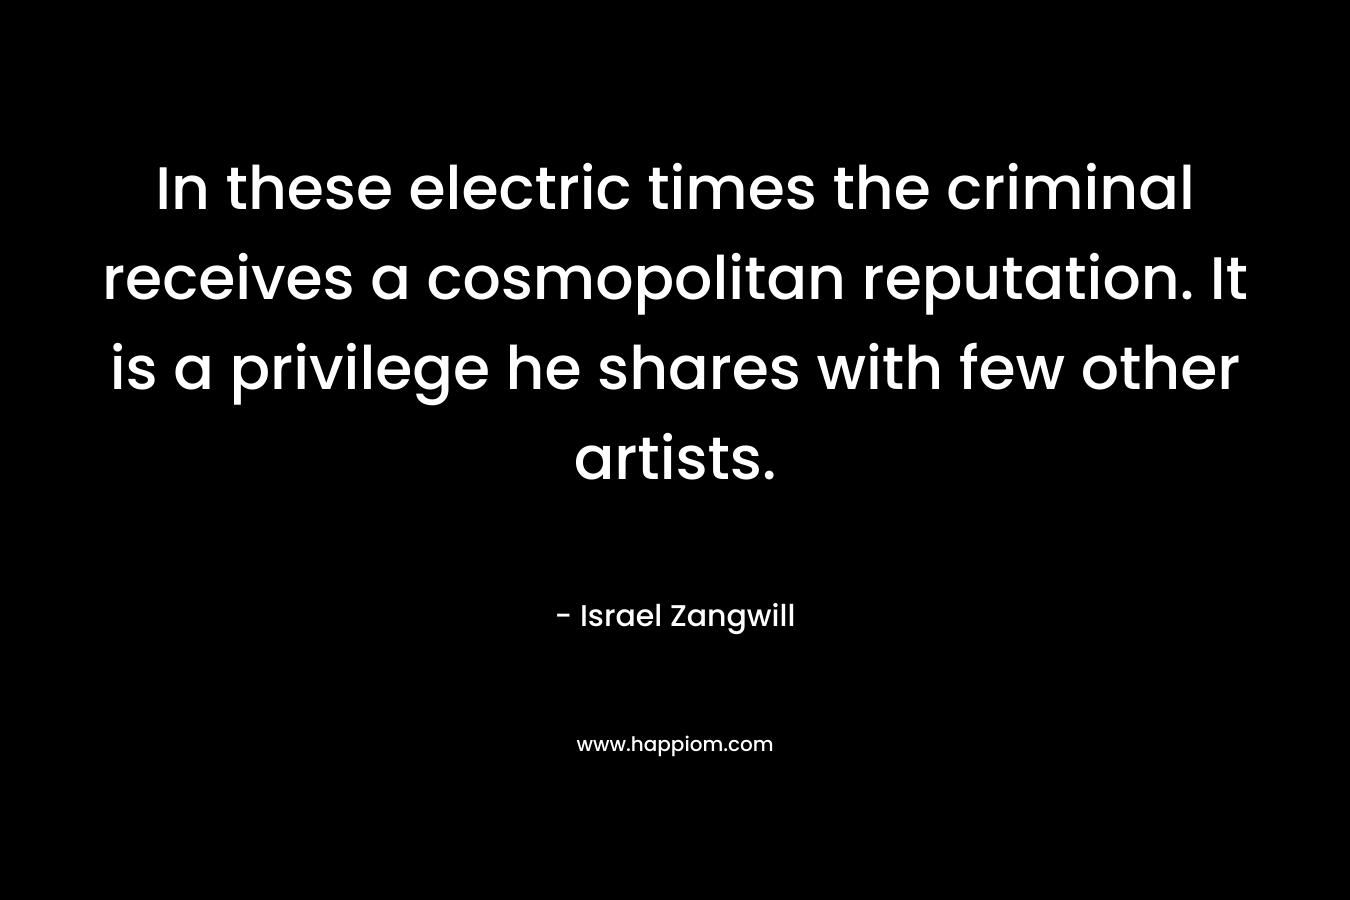 In these electric times the criminal receives a cosmopolitan reputation. It is a privilege he shares with few other artists. – Israel Zangwill